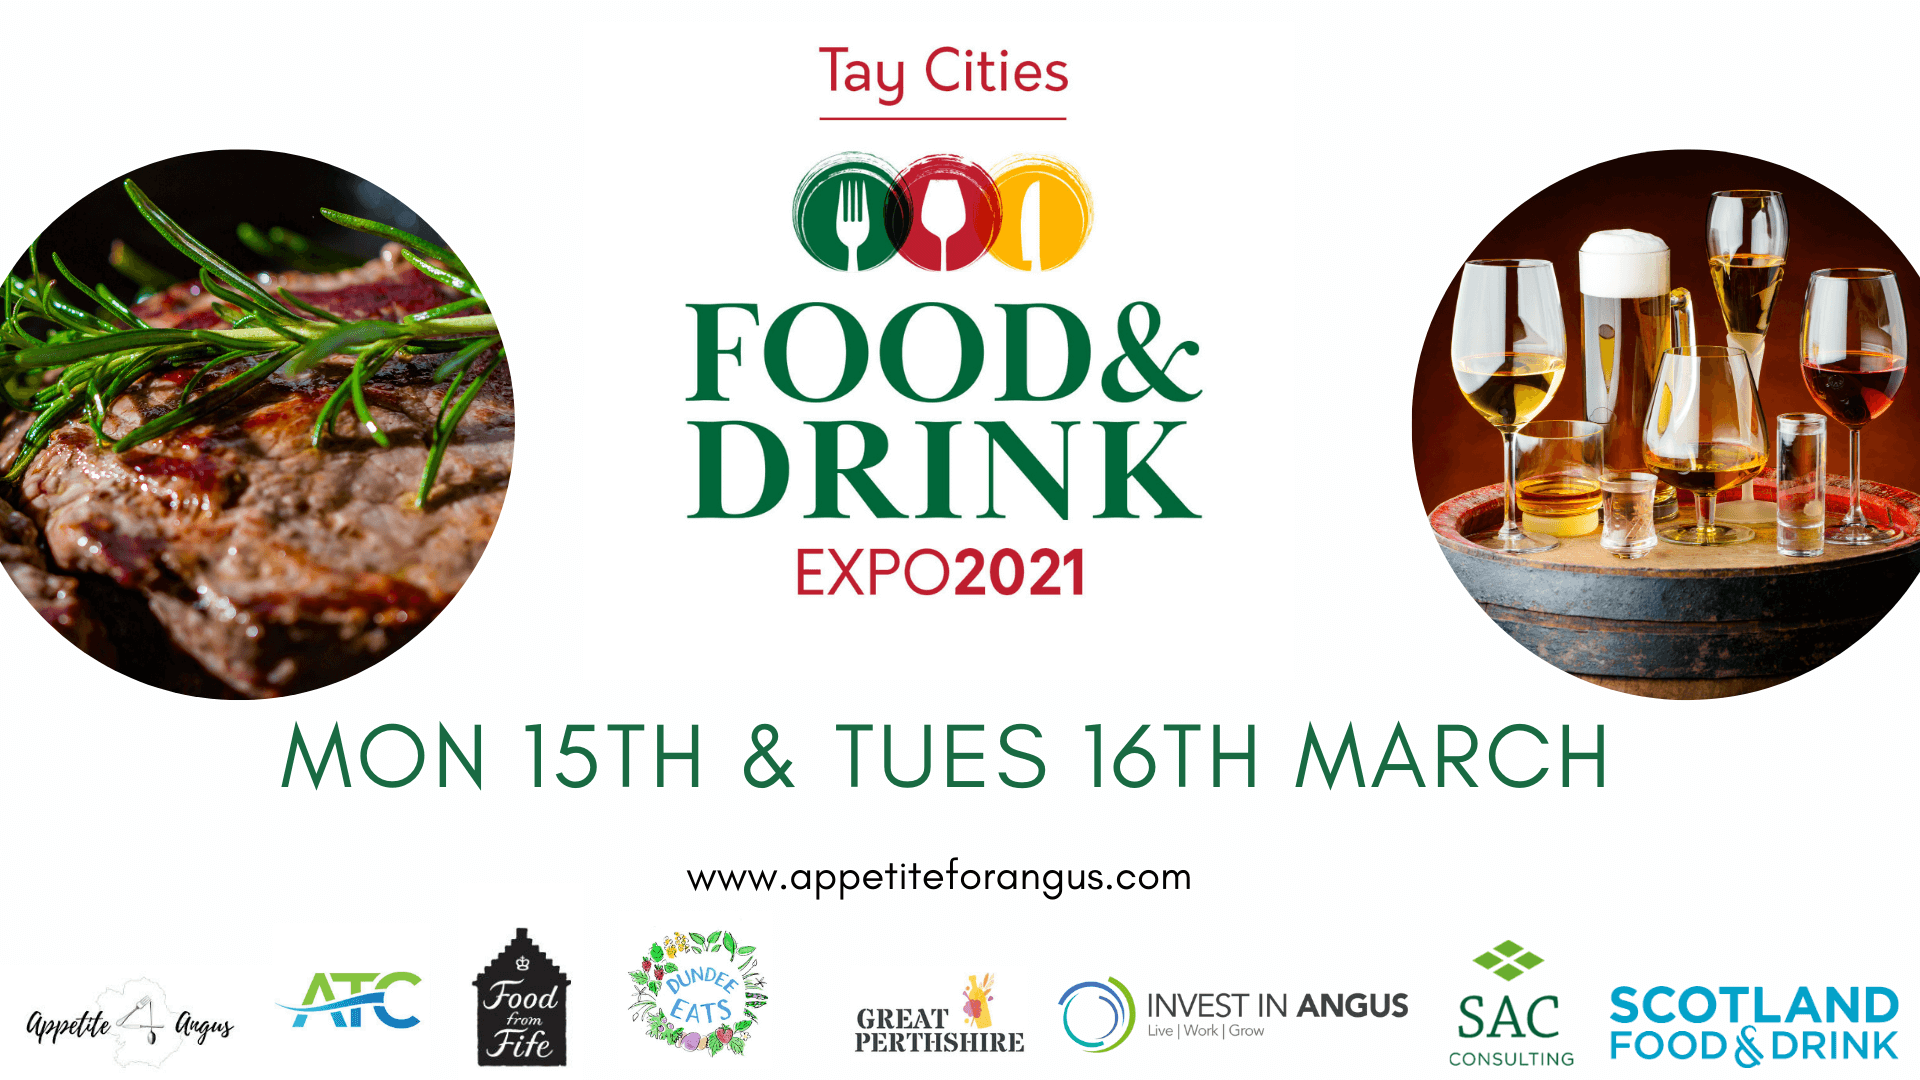 Tay Cities Food & Drink Expo 2021